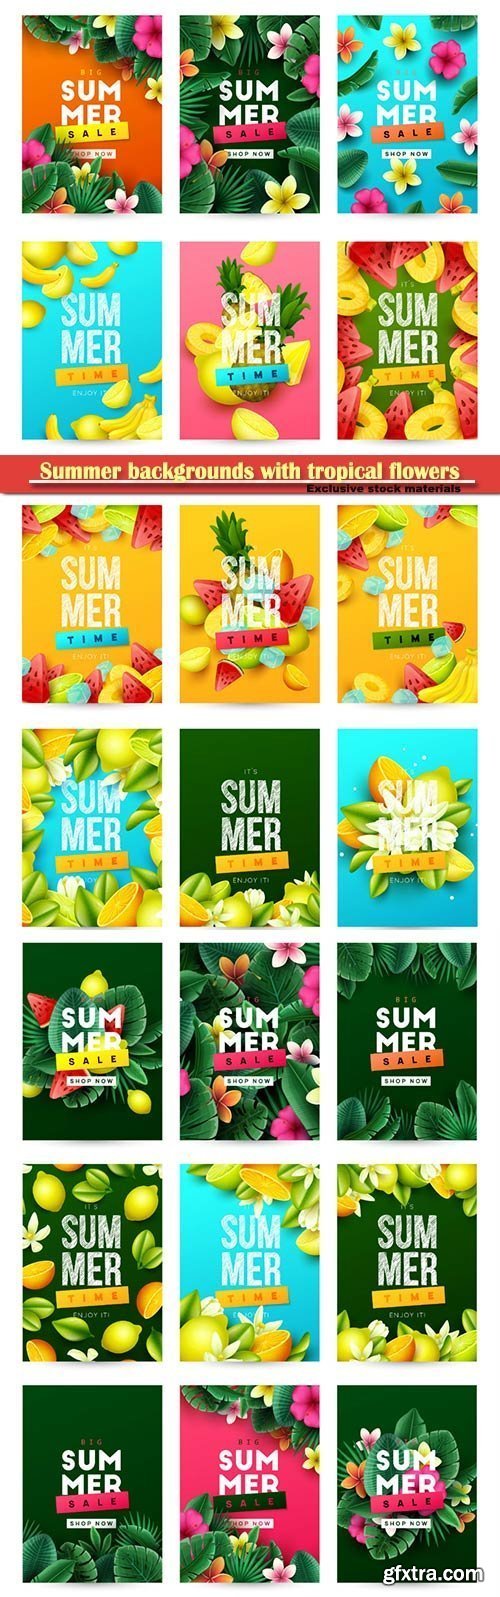 Summer backgrounds with tropical flowers and palm leaves